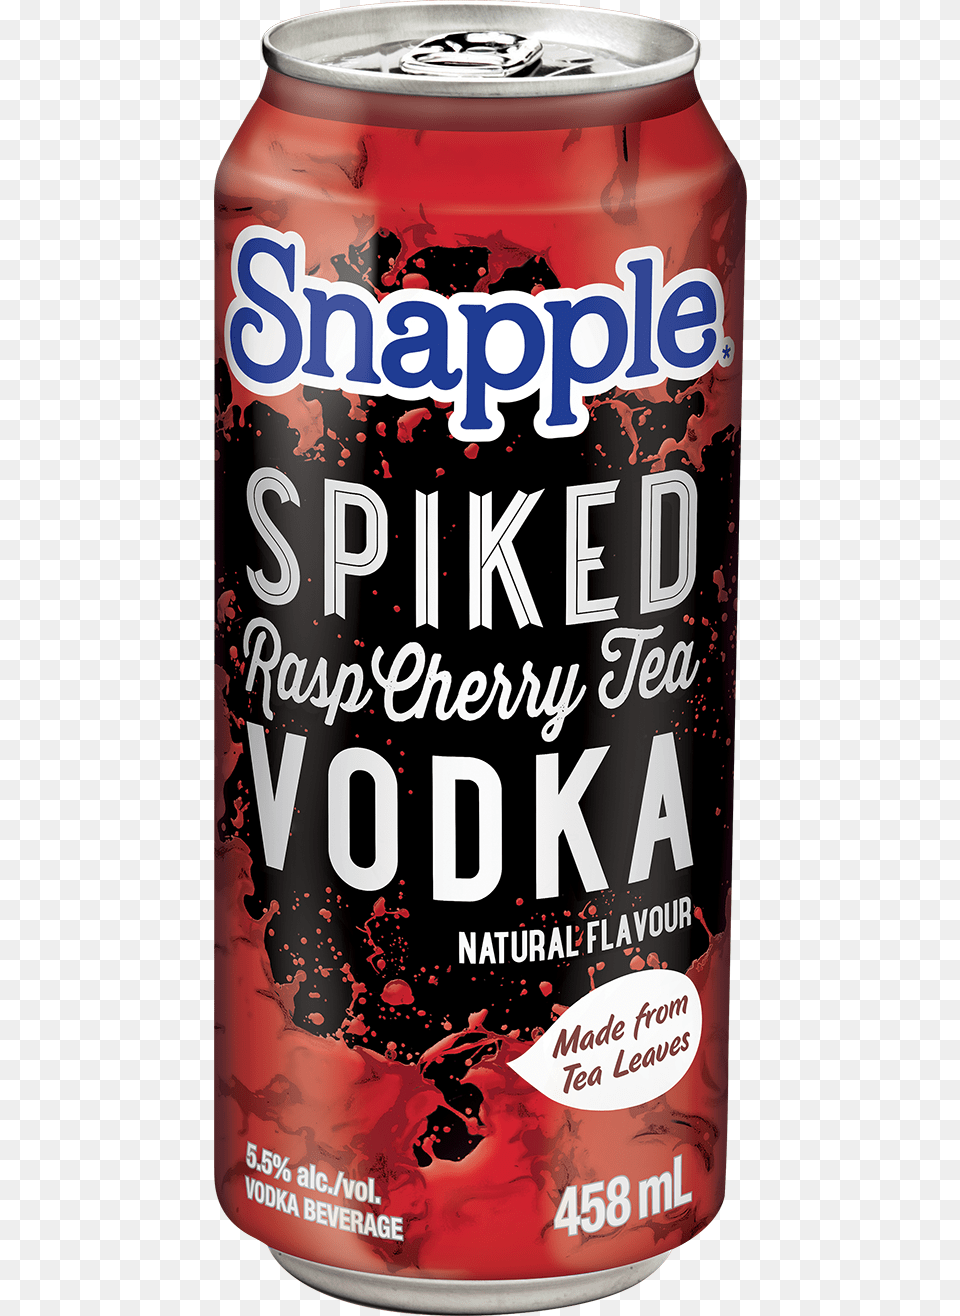 Snapple Spiked Rasp Cherry Tea Poster, Can, Tin, Beverage, Soda Free Png